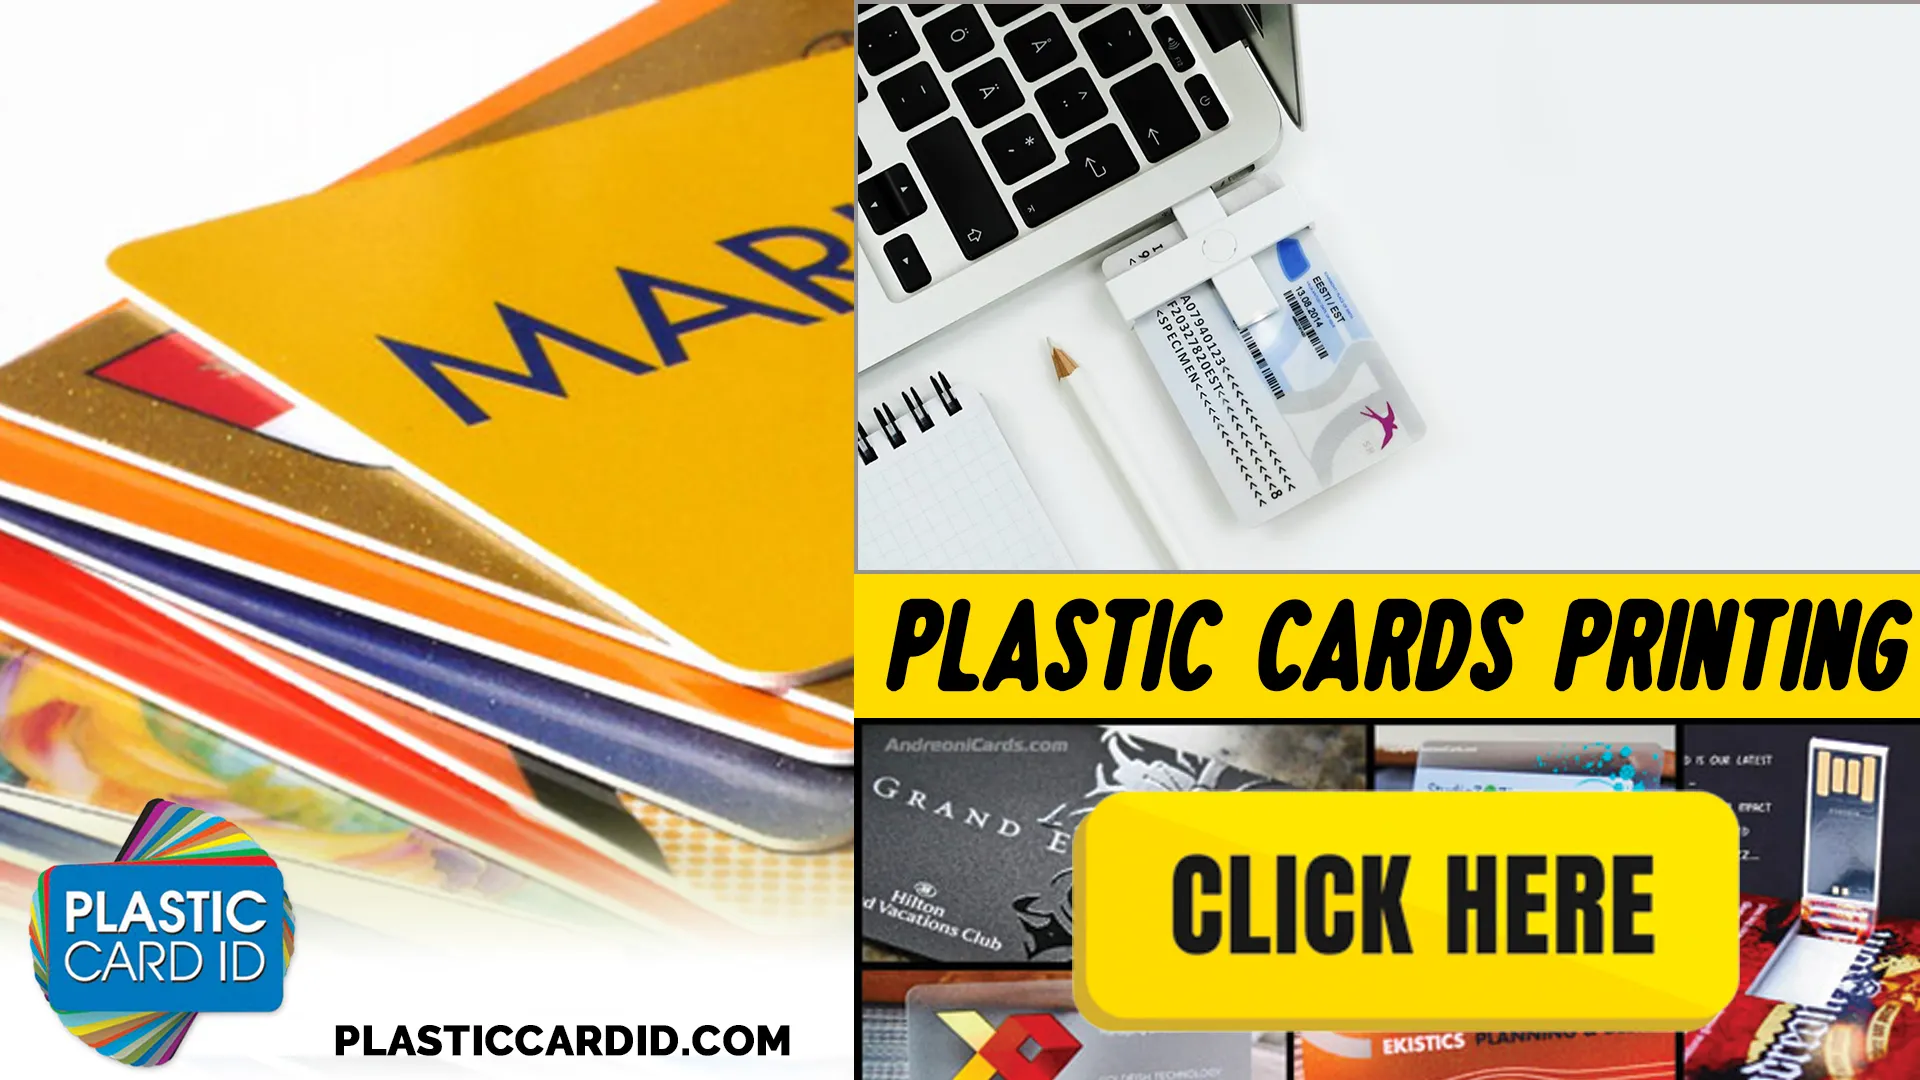 Integrating RFID Technology with Our Plastic Cards